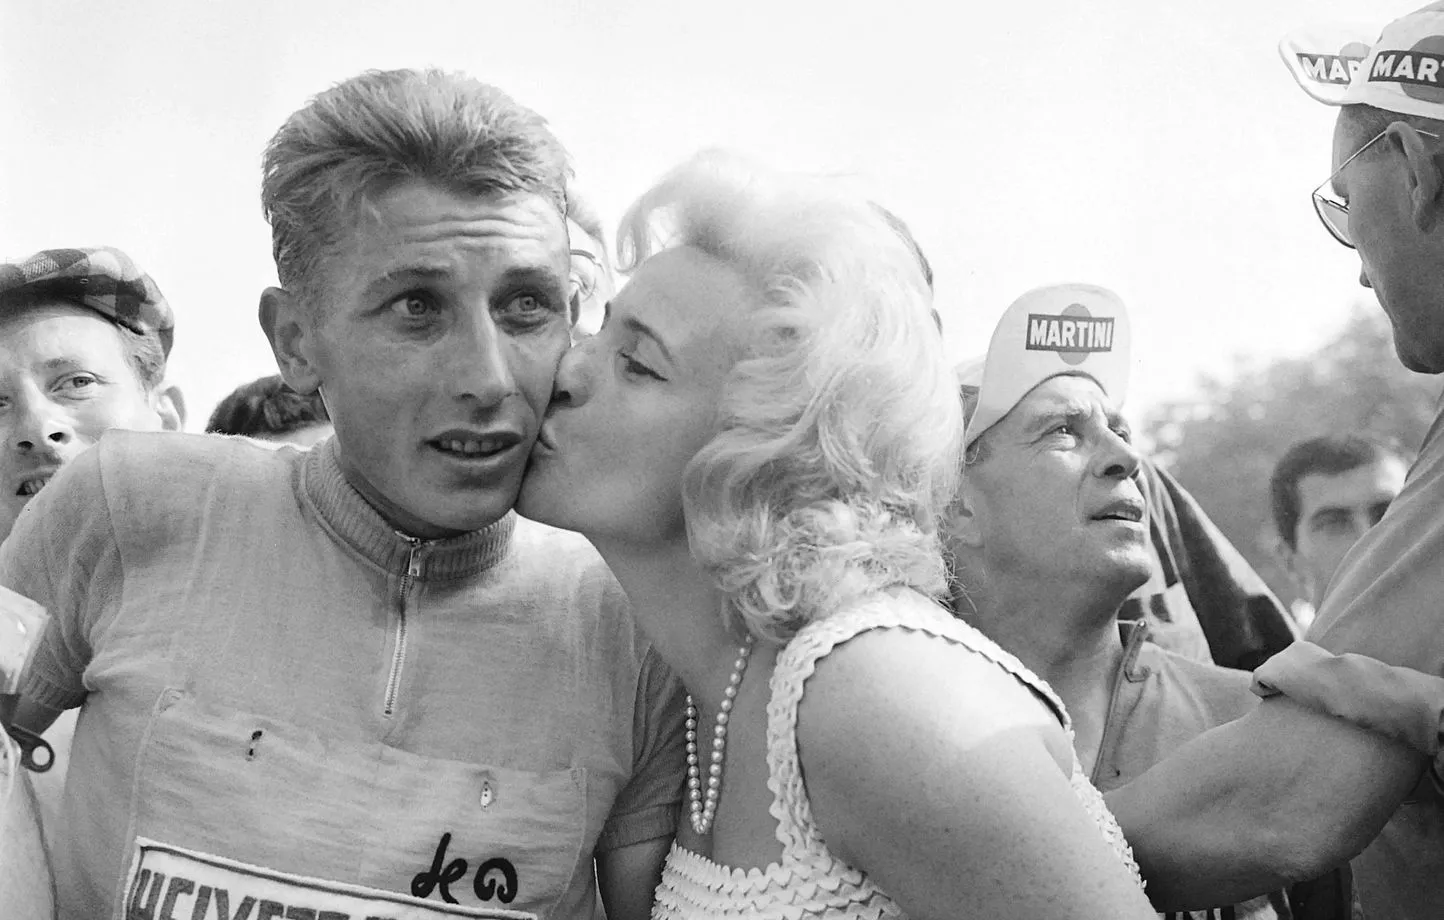 1444x920 french cyclist jacques anquetil is kissed by his wife janine anquetil on july 6 1961 winning the 11th stage turin juan les pins of the 1961 tour de france photo by afp